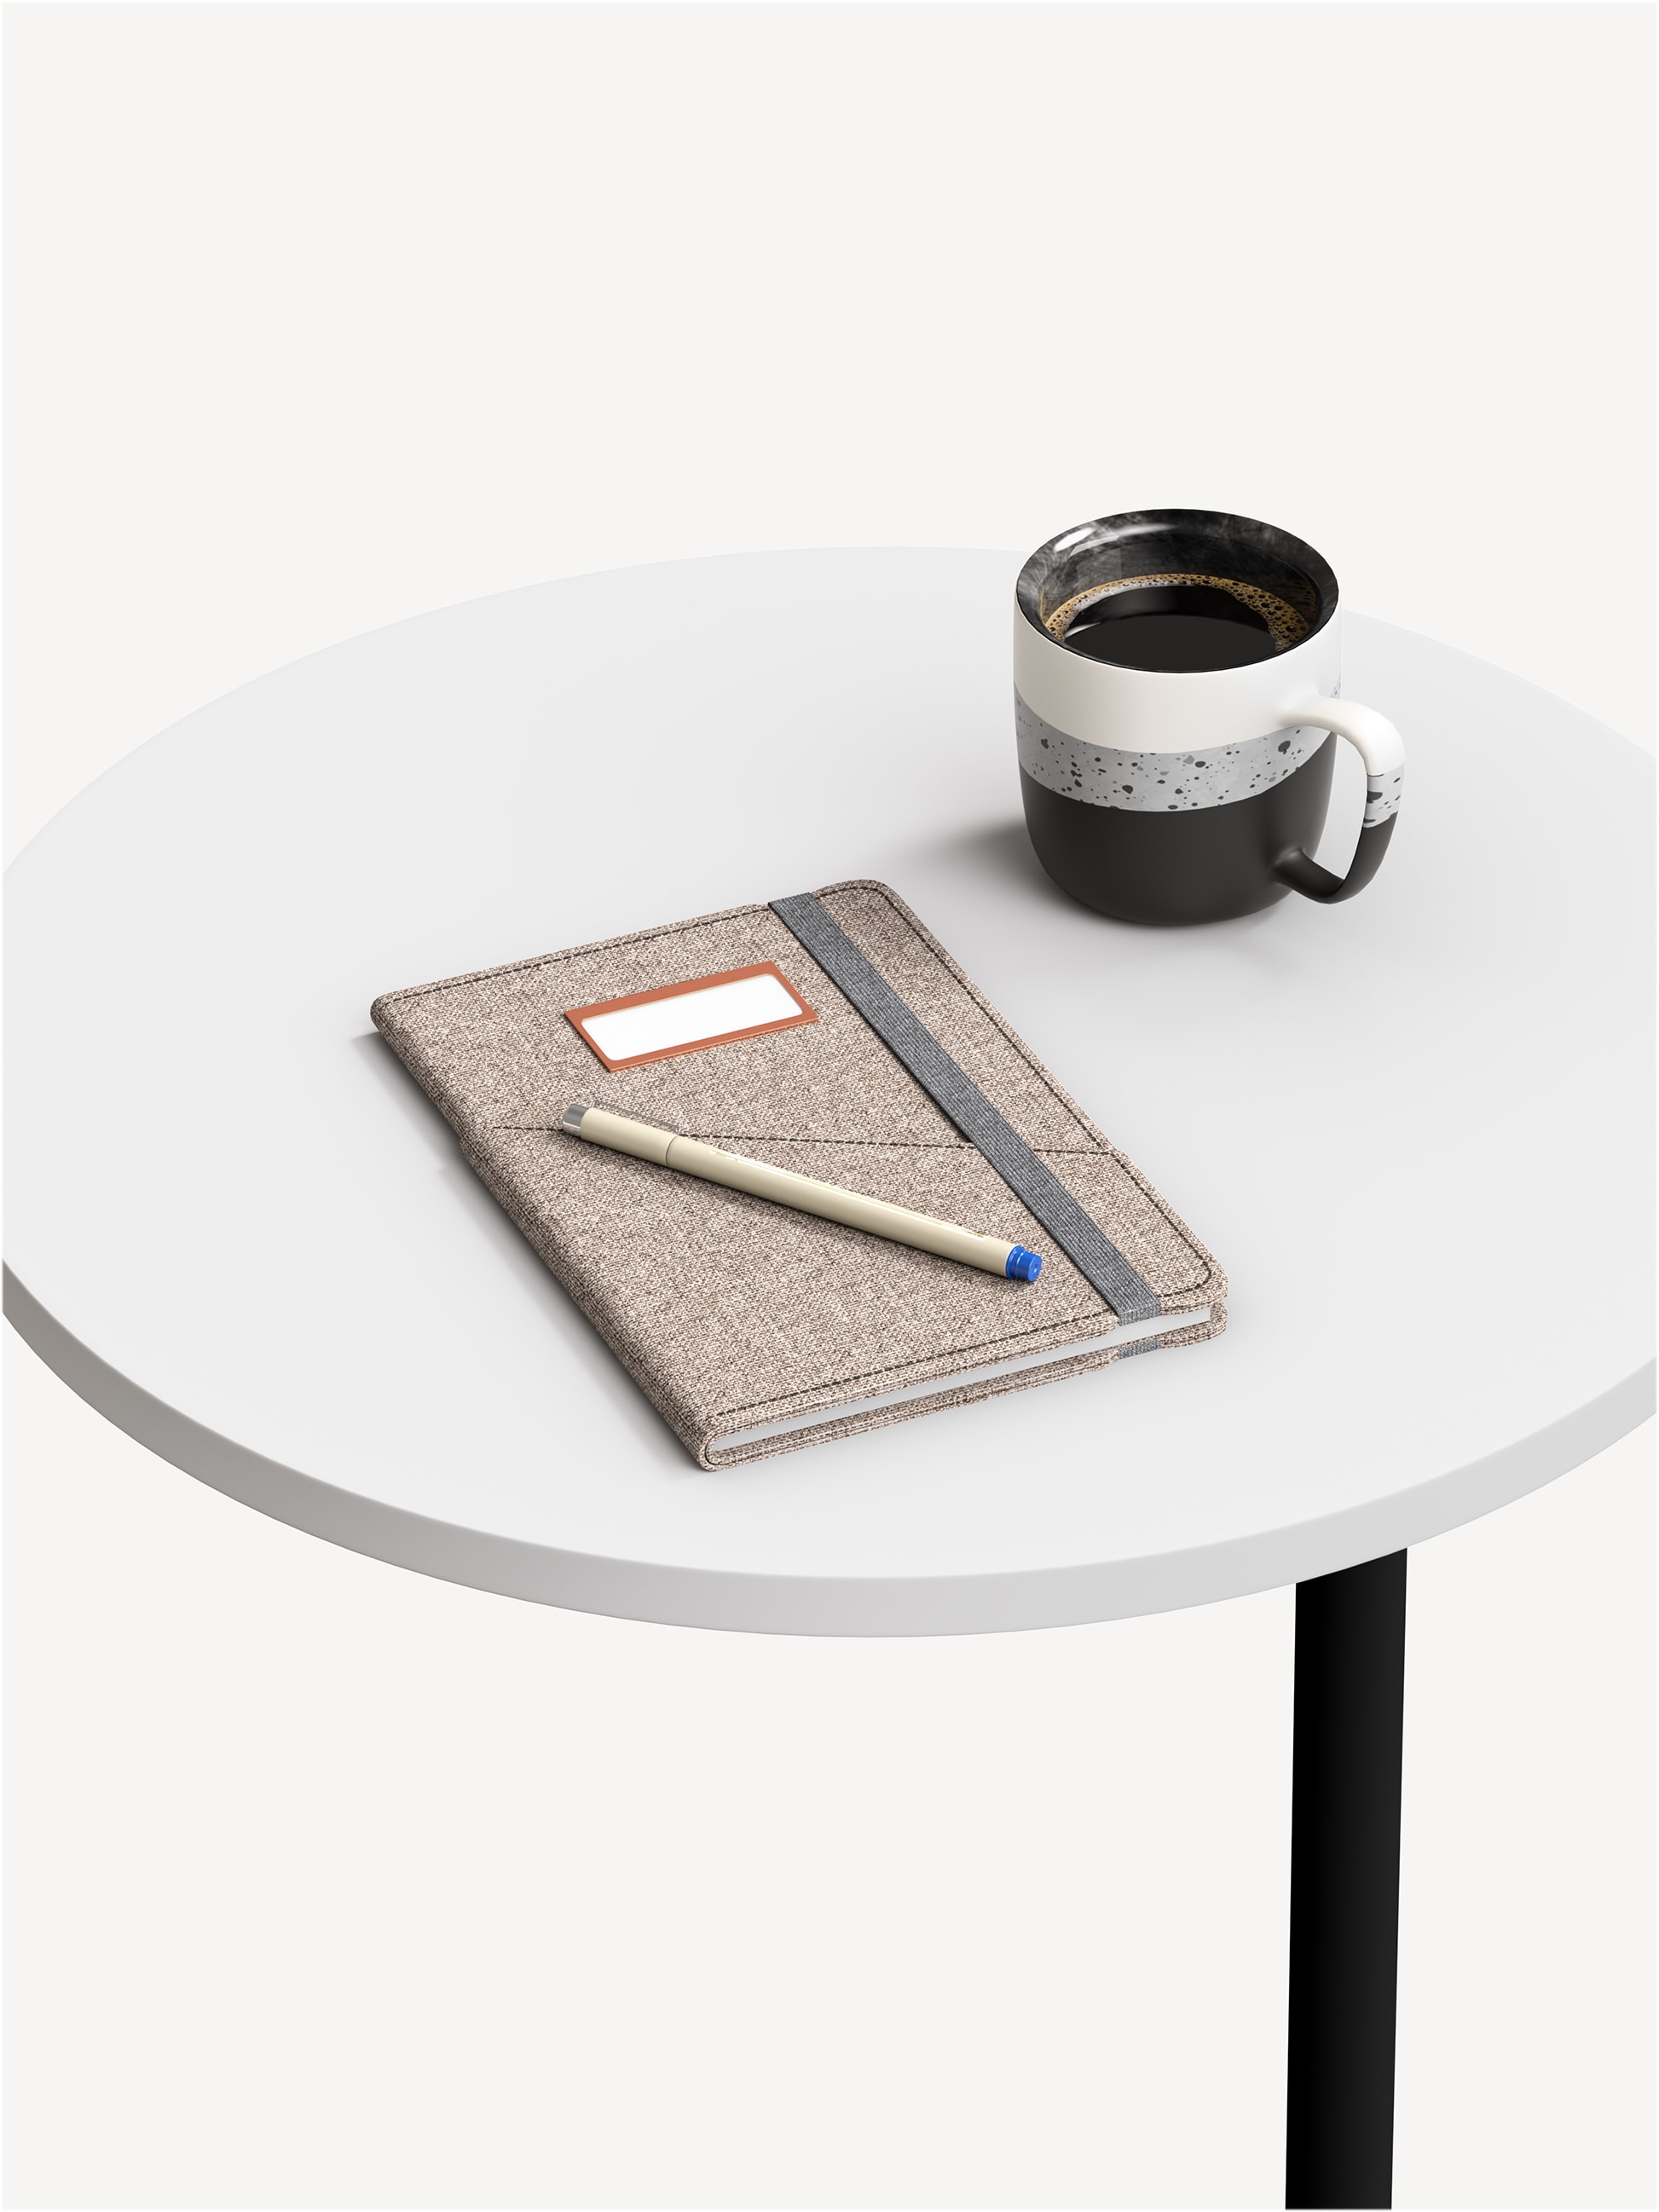 Detail view of a Rise occasional table with a black base and white, round table top with a coffee mug and notebook on top.